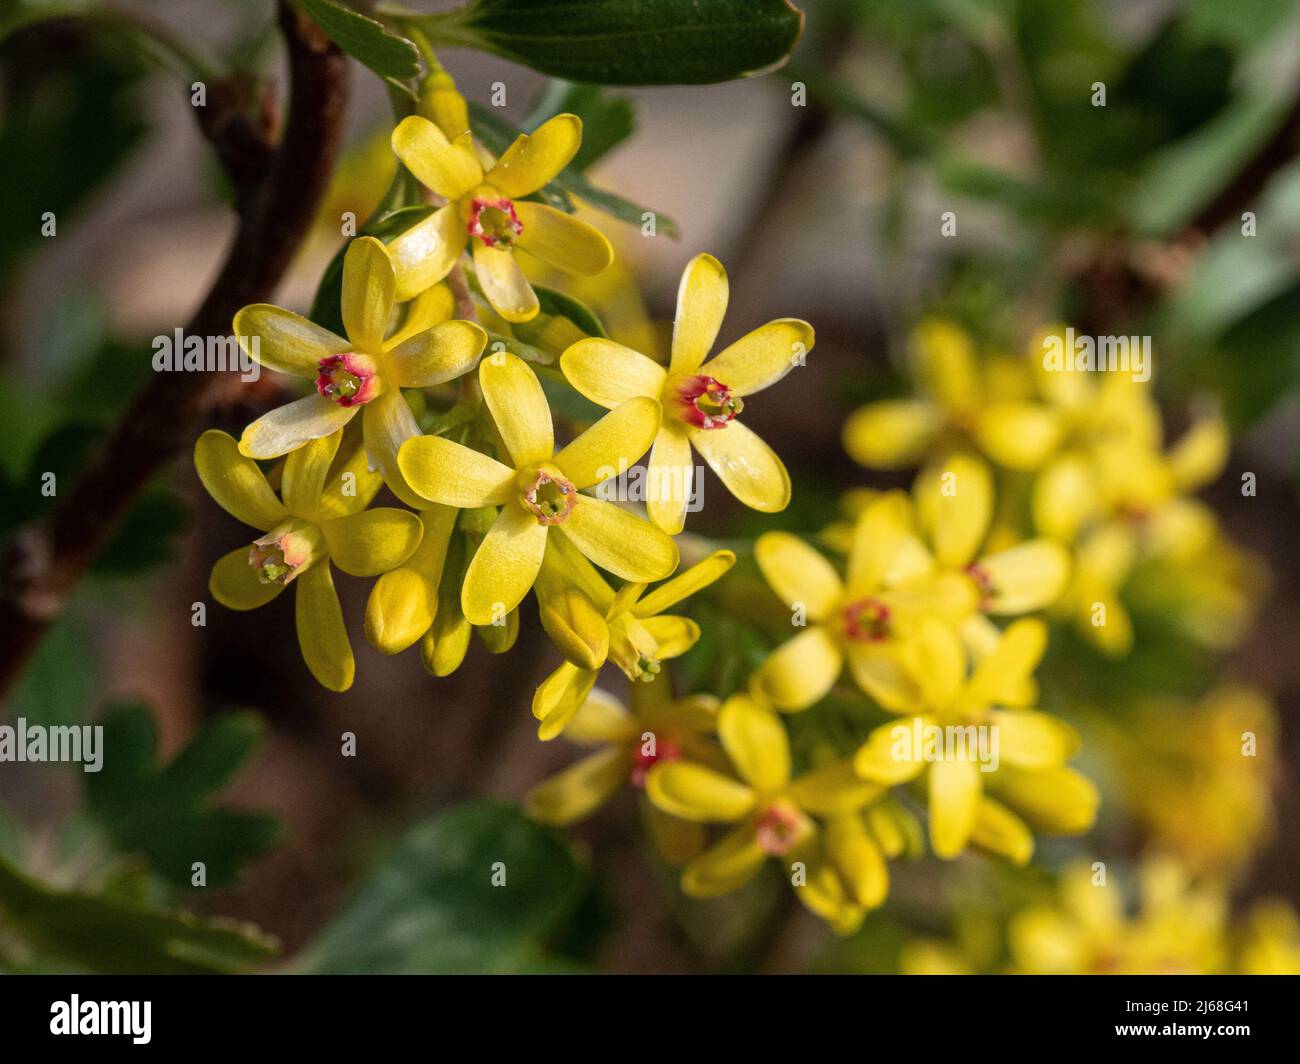 A close up of the yellow flowers of Ribes odoratum showing the red stamens in the centre Stock Photo